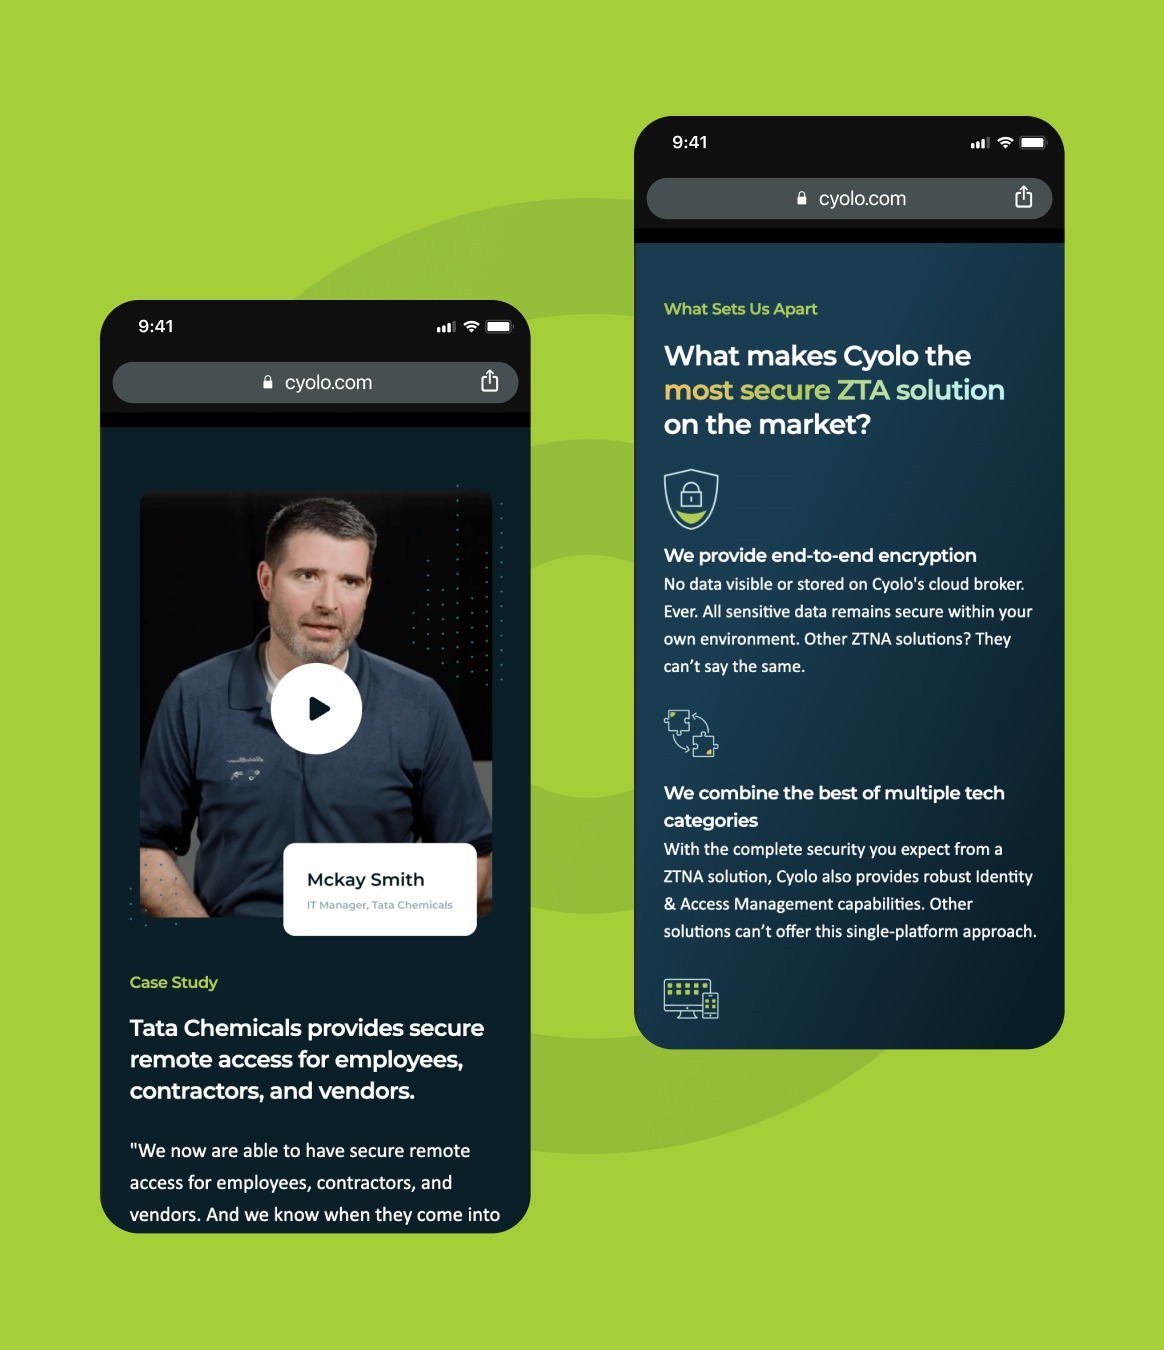 Showcase of the Responsive Mobile design for the Cyolo website